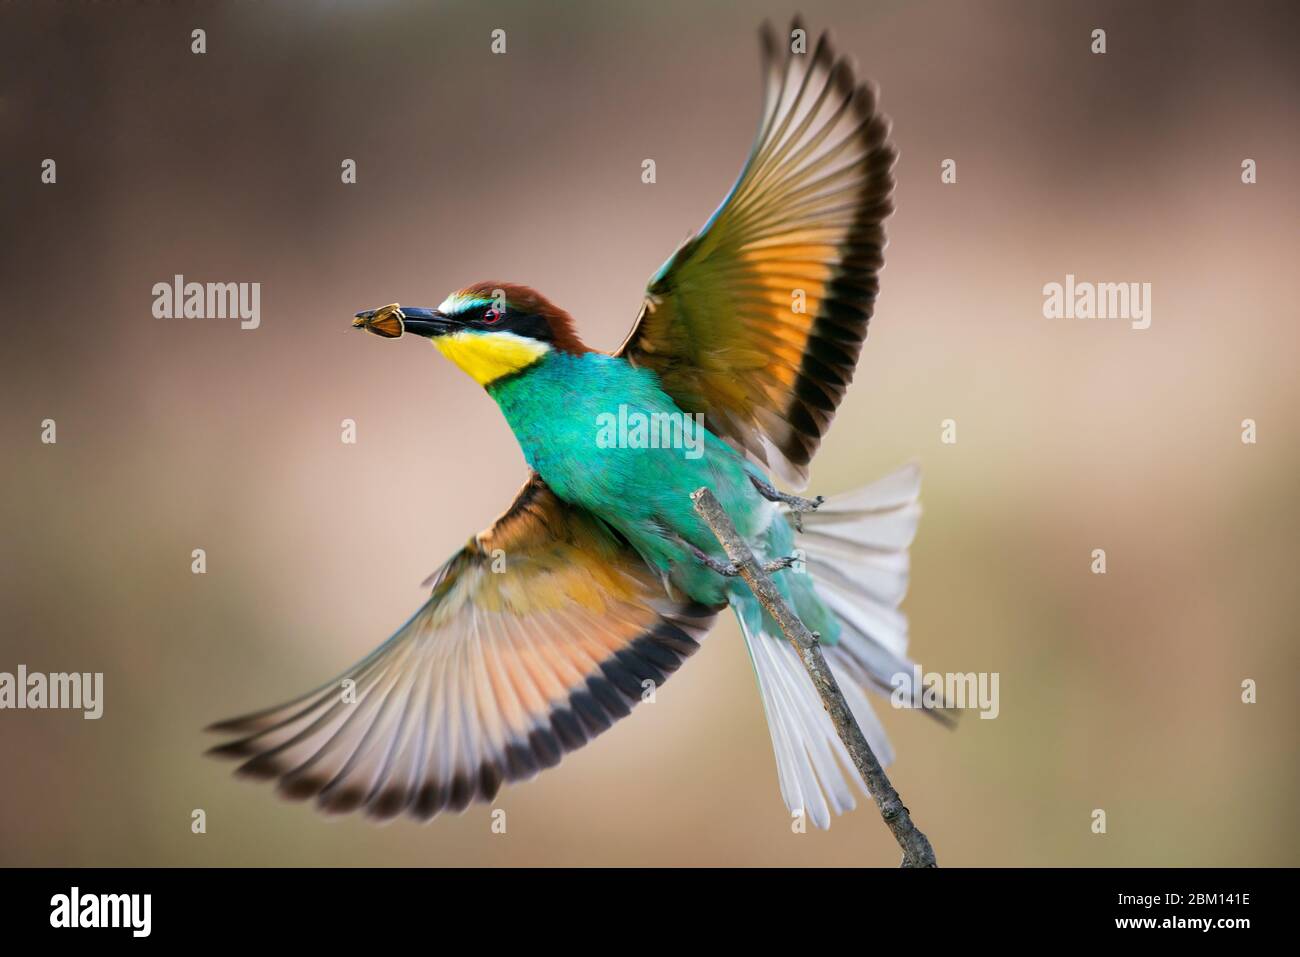 Colourful birds. European bee-eater, merops apiaster in flight on a beautiful background, with a butterfly in its beak. Stock Photo